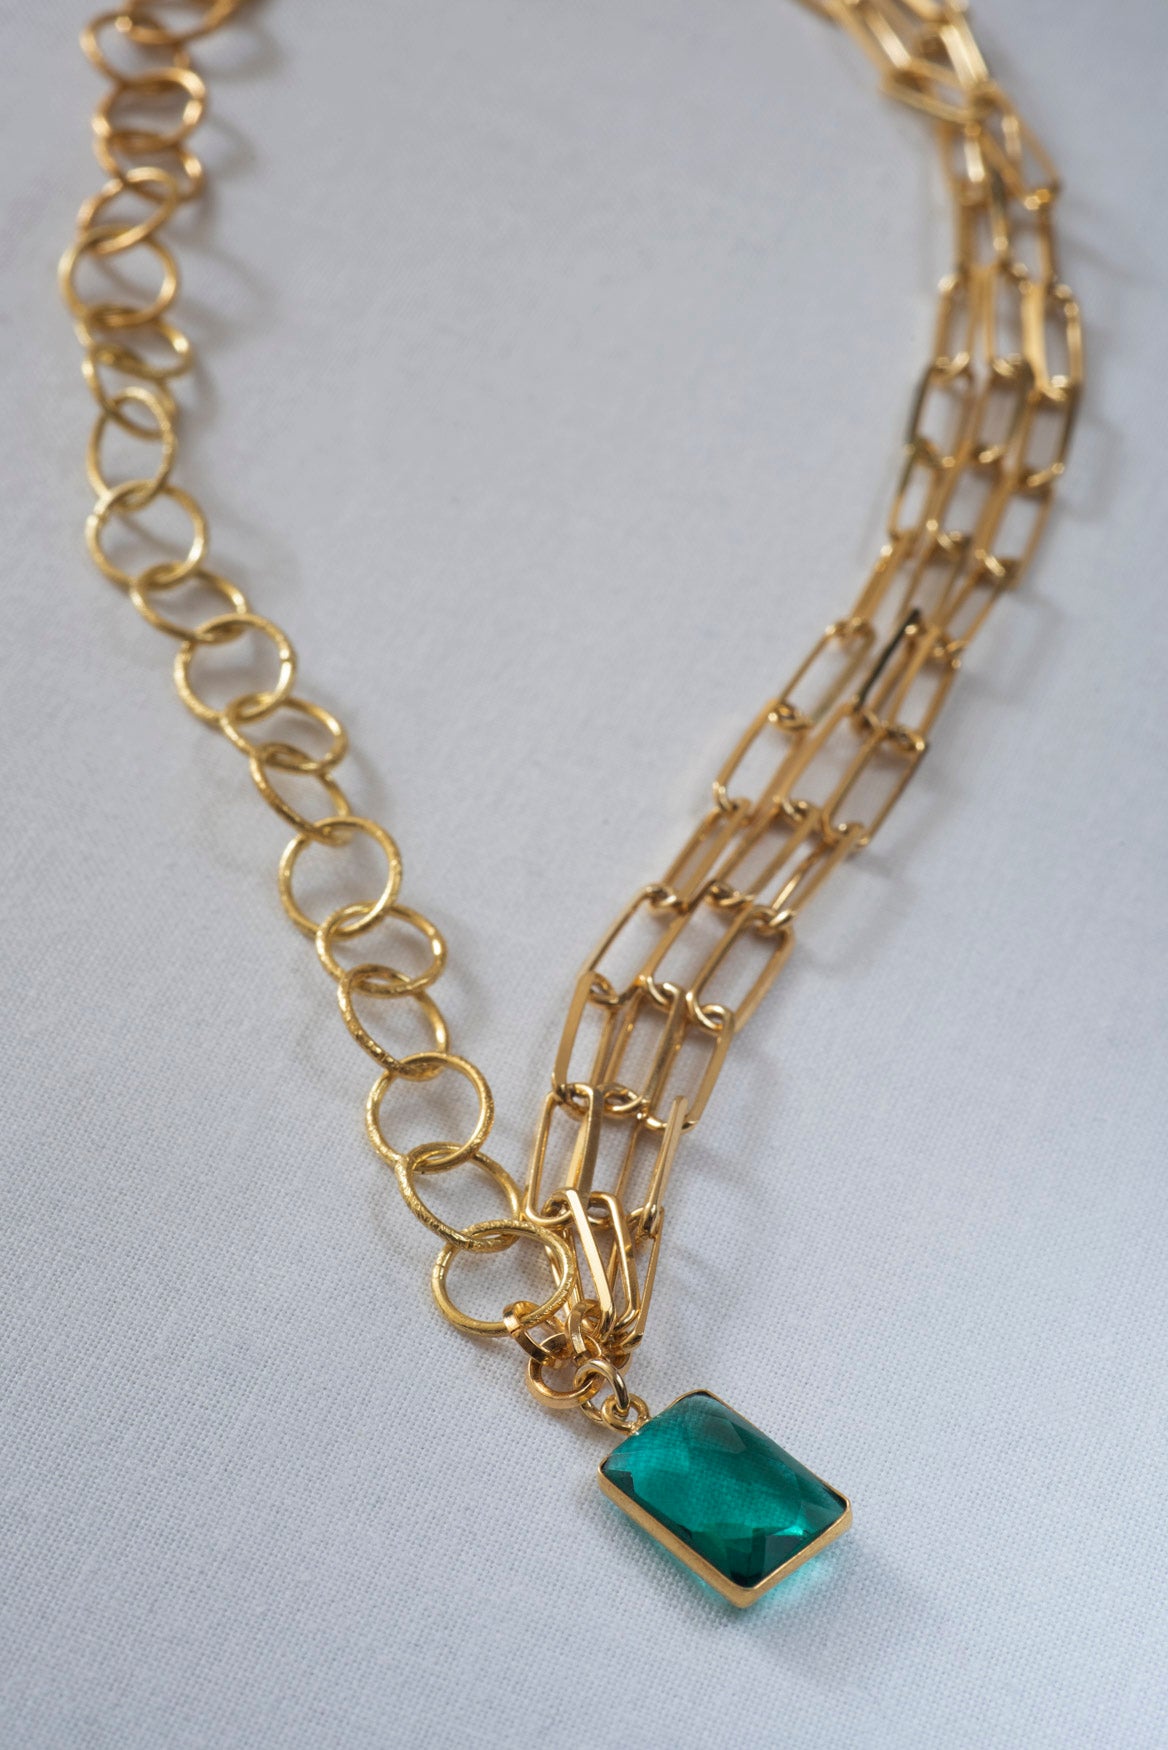 Green Amethyst Paperclip Necklace from One Dame Lane Handmade Jewellery